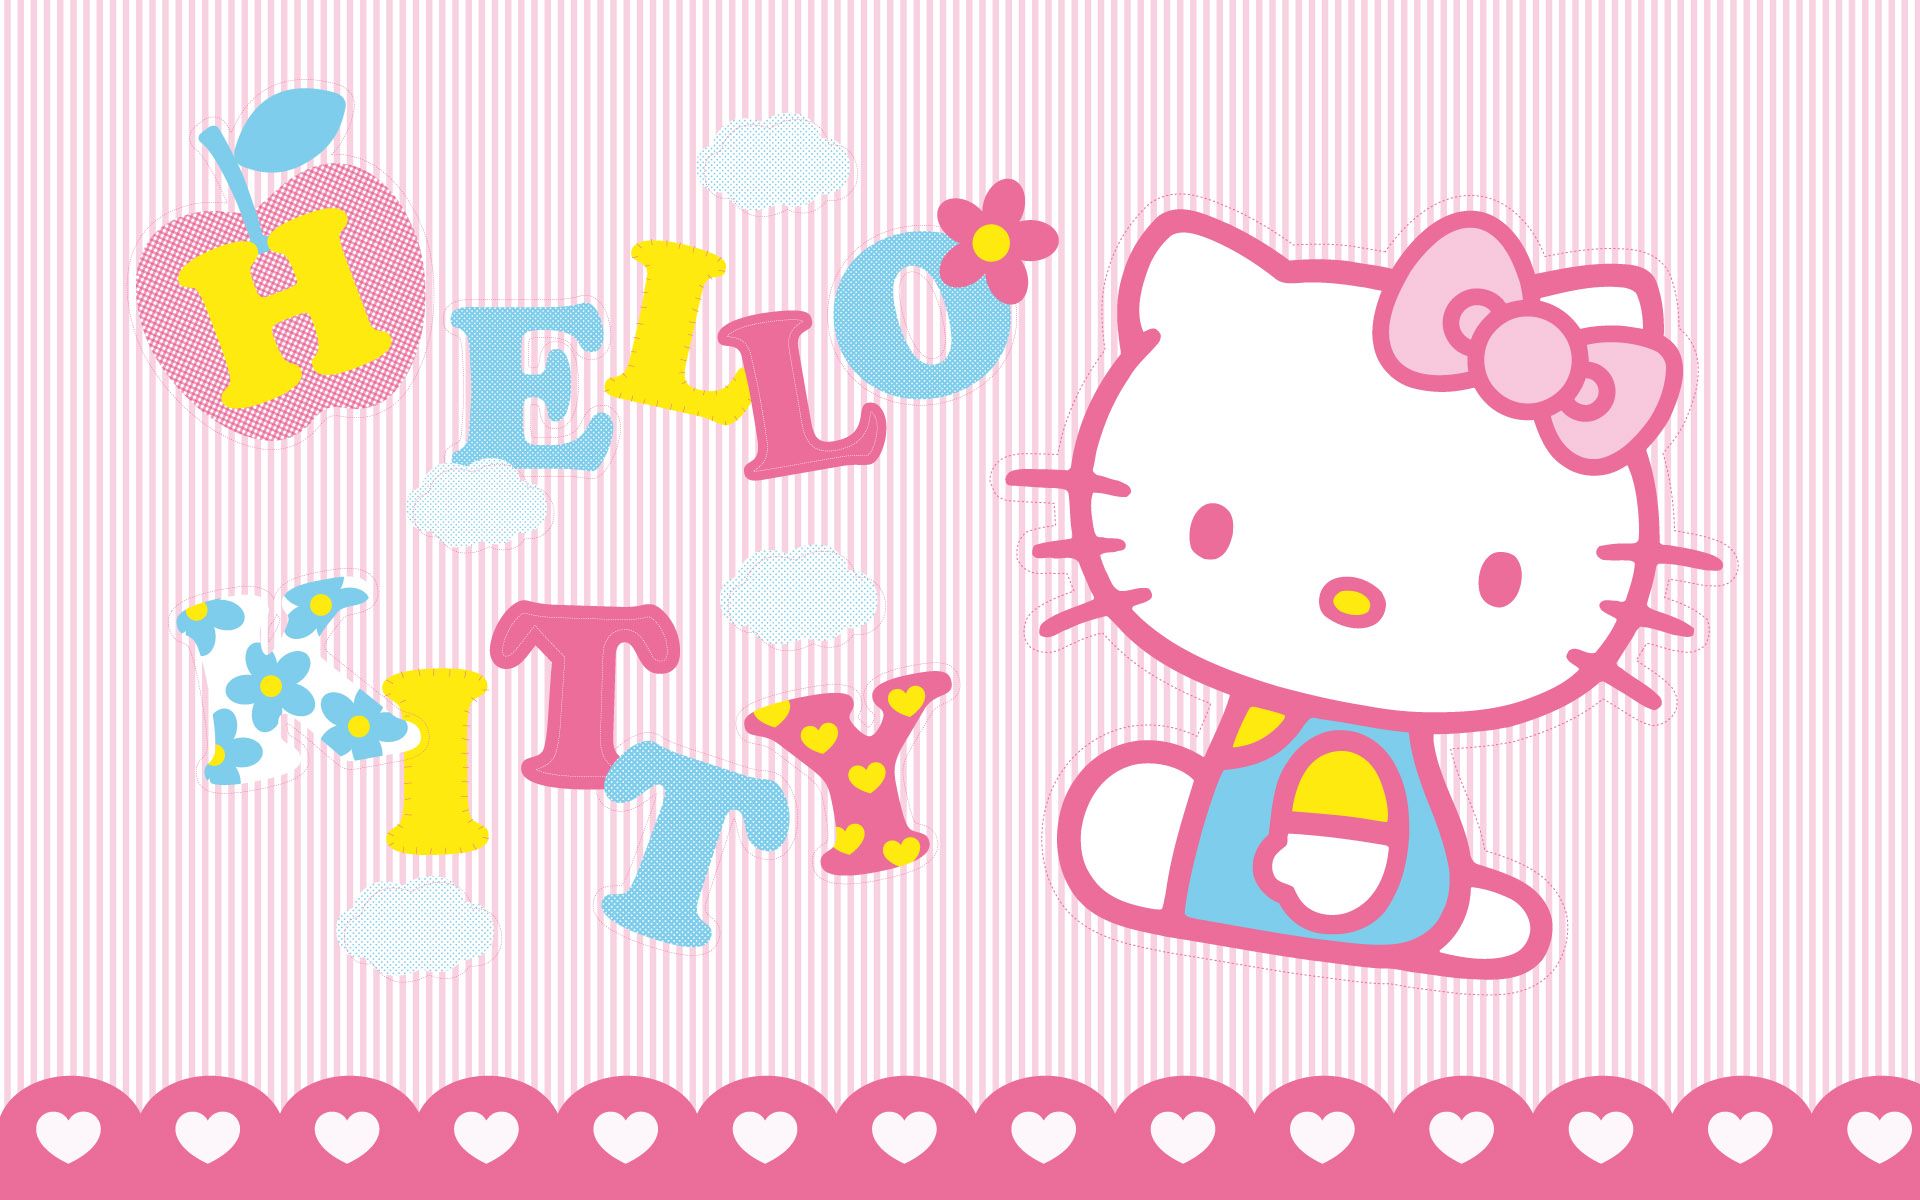 Hello Kitty Wallpaper HD | Wallpapers, Backgrounds, Images, Art ...